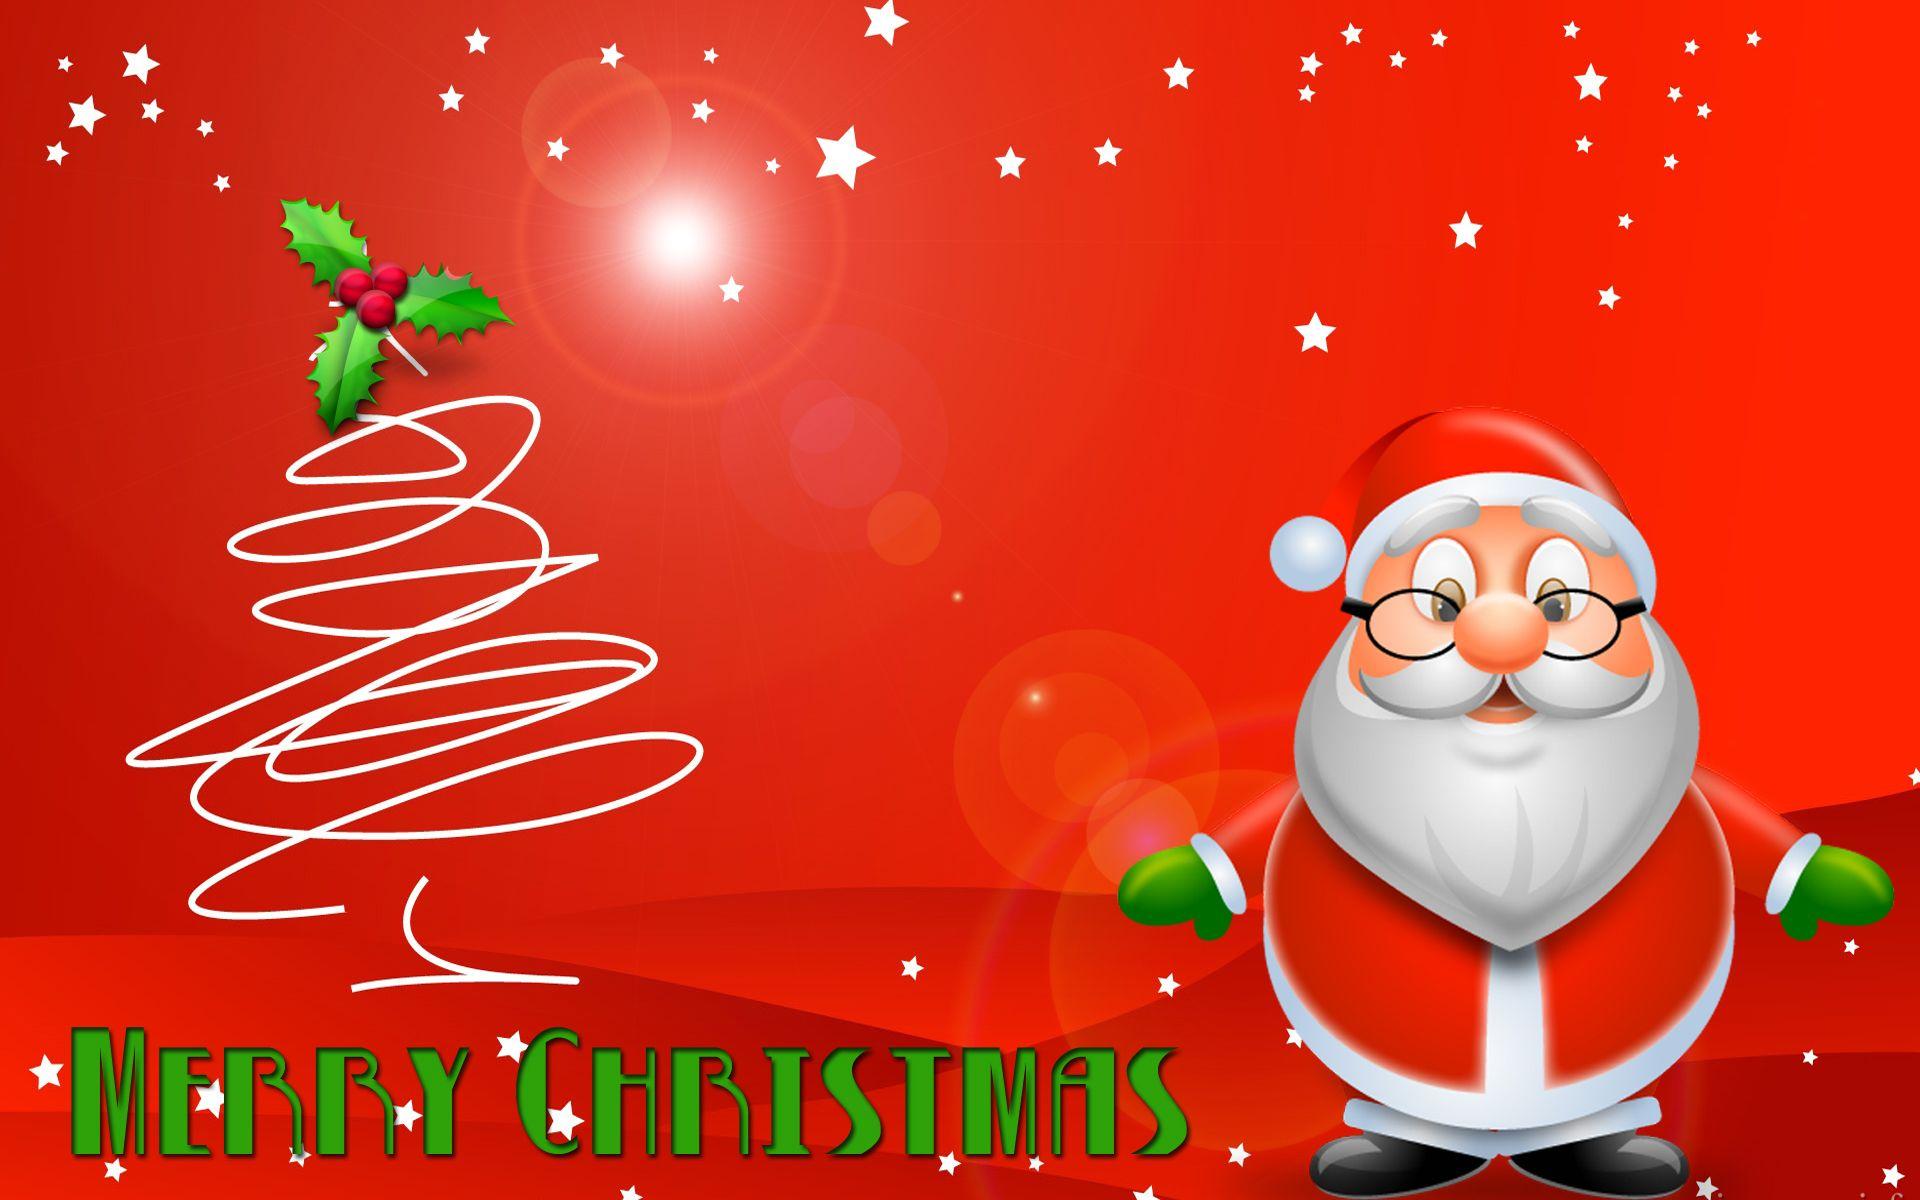 Merry Christmas Santa Claus Image Picture Wallpaper 2017